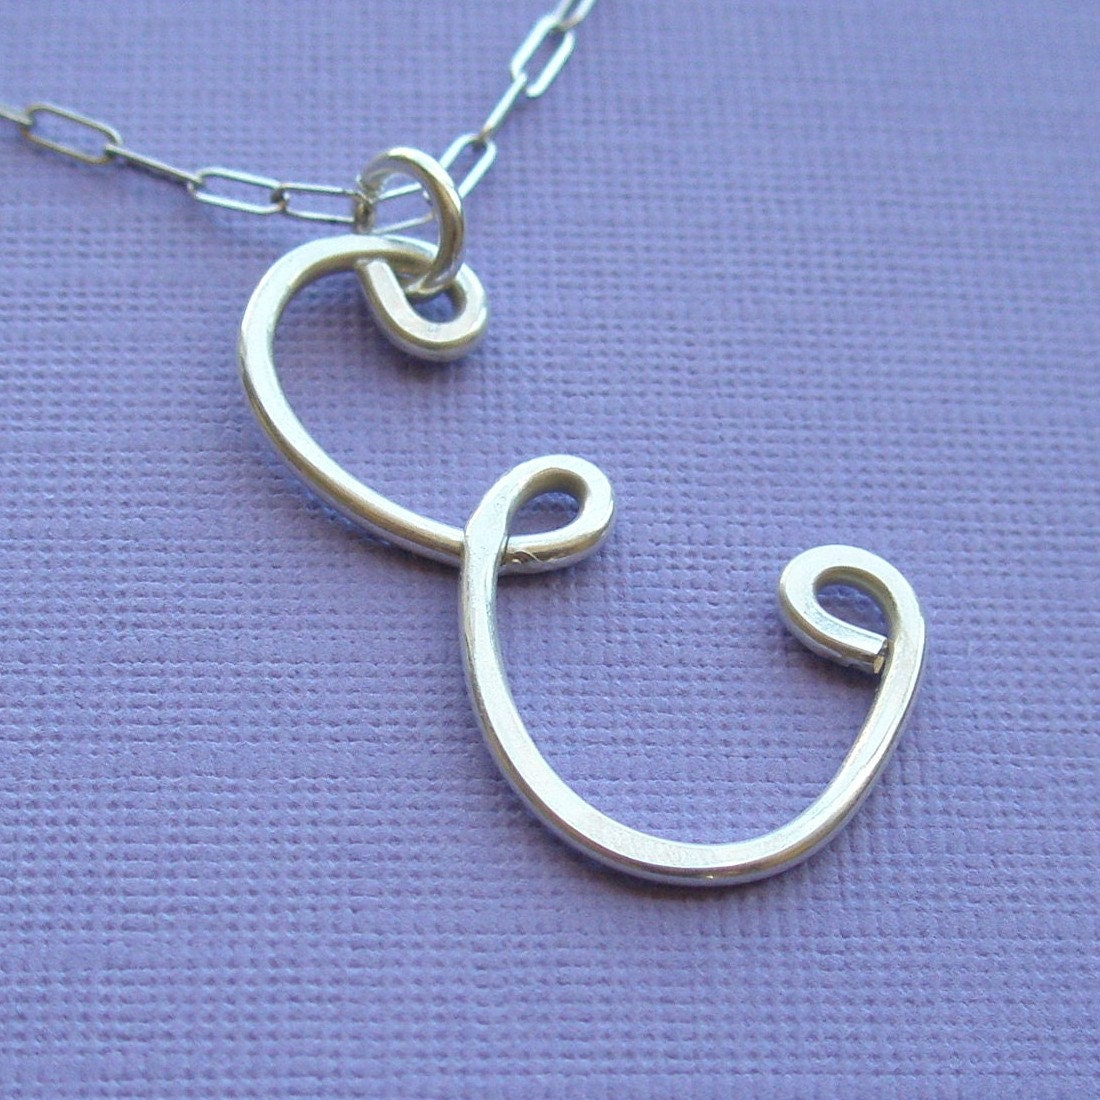 The Letter E Necklace - all sterling silver